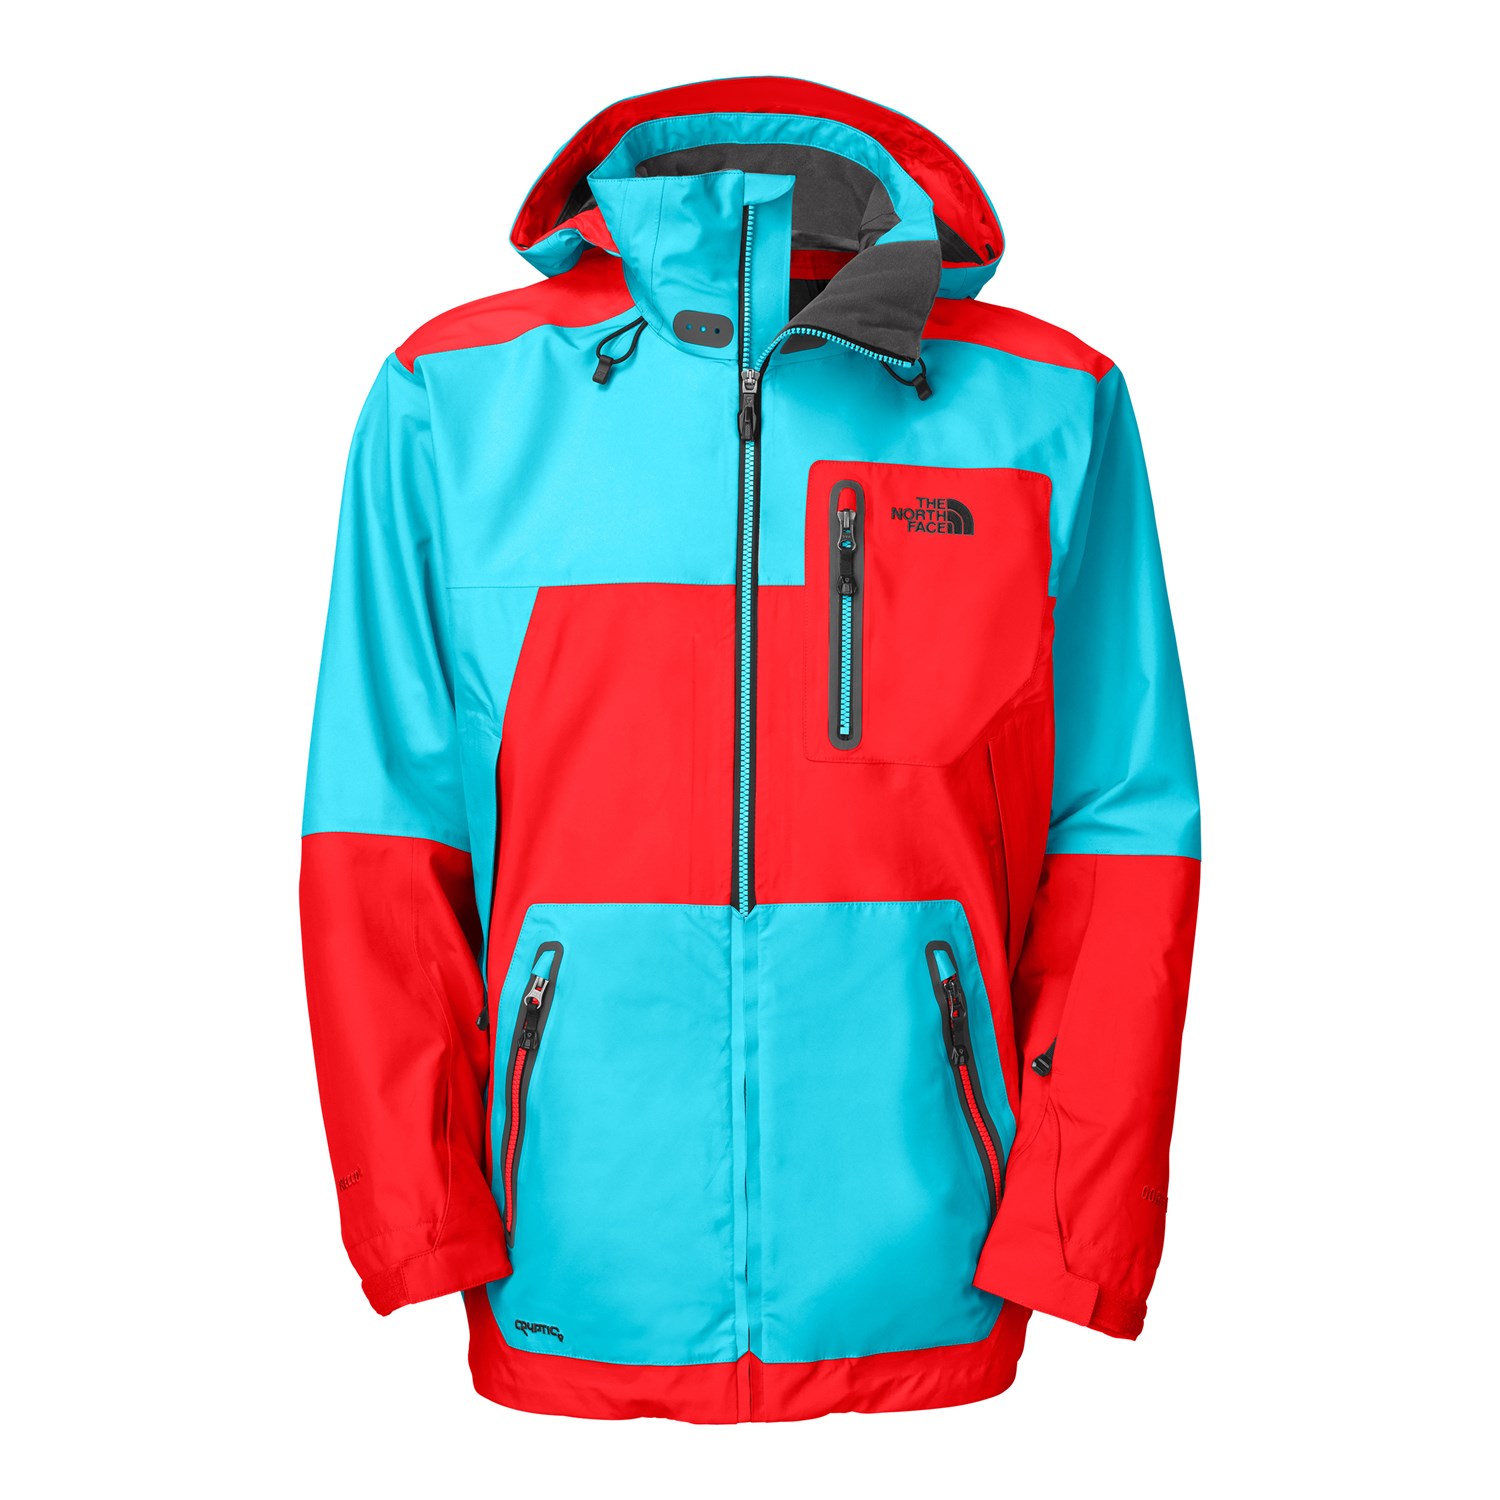 The North Face Spineology Jacket | evo